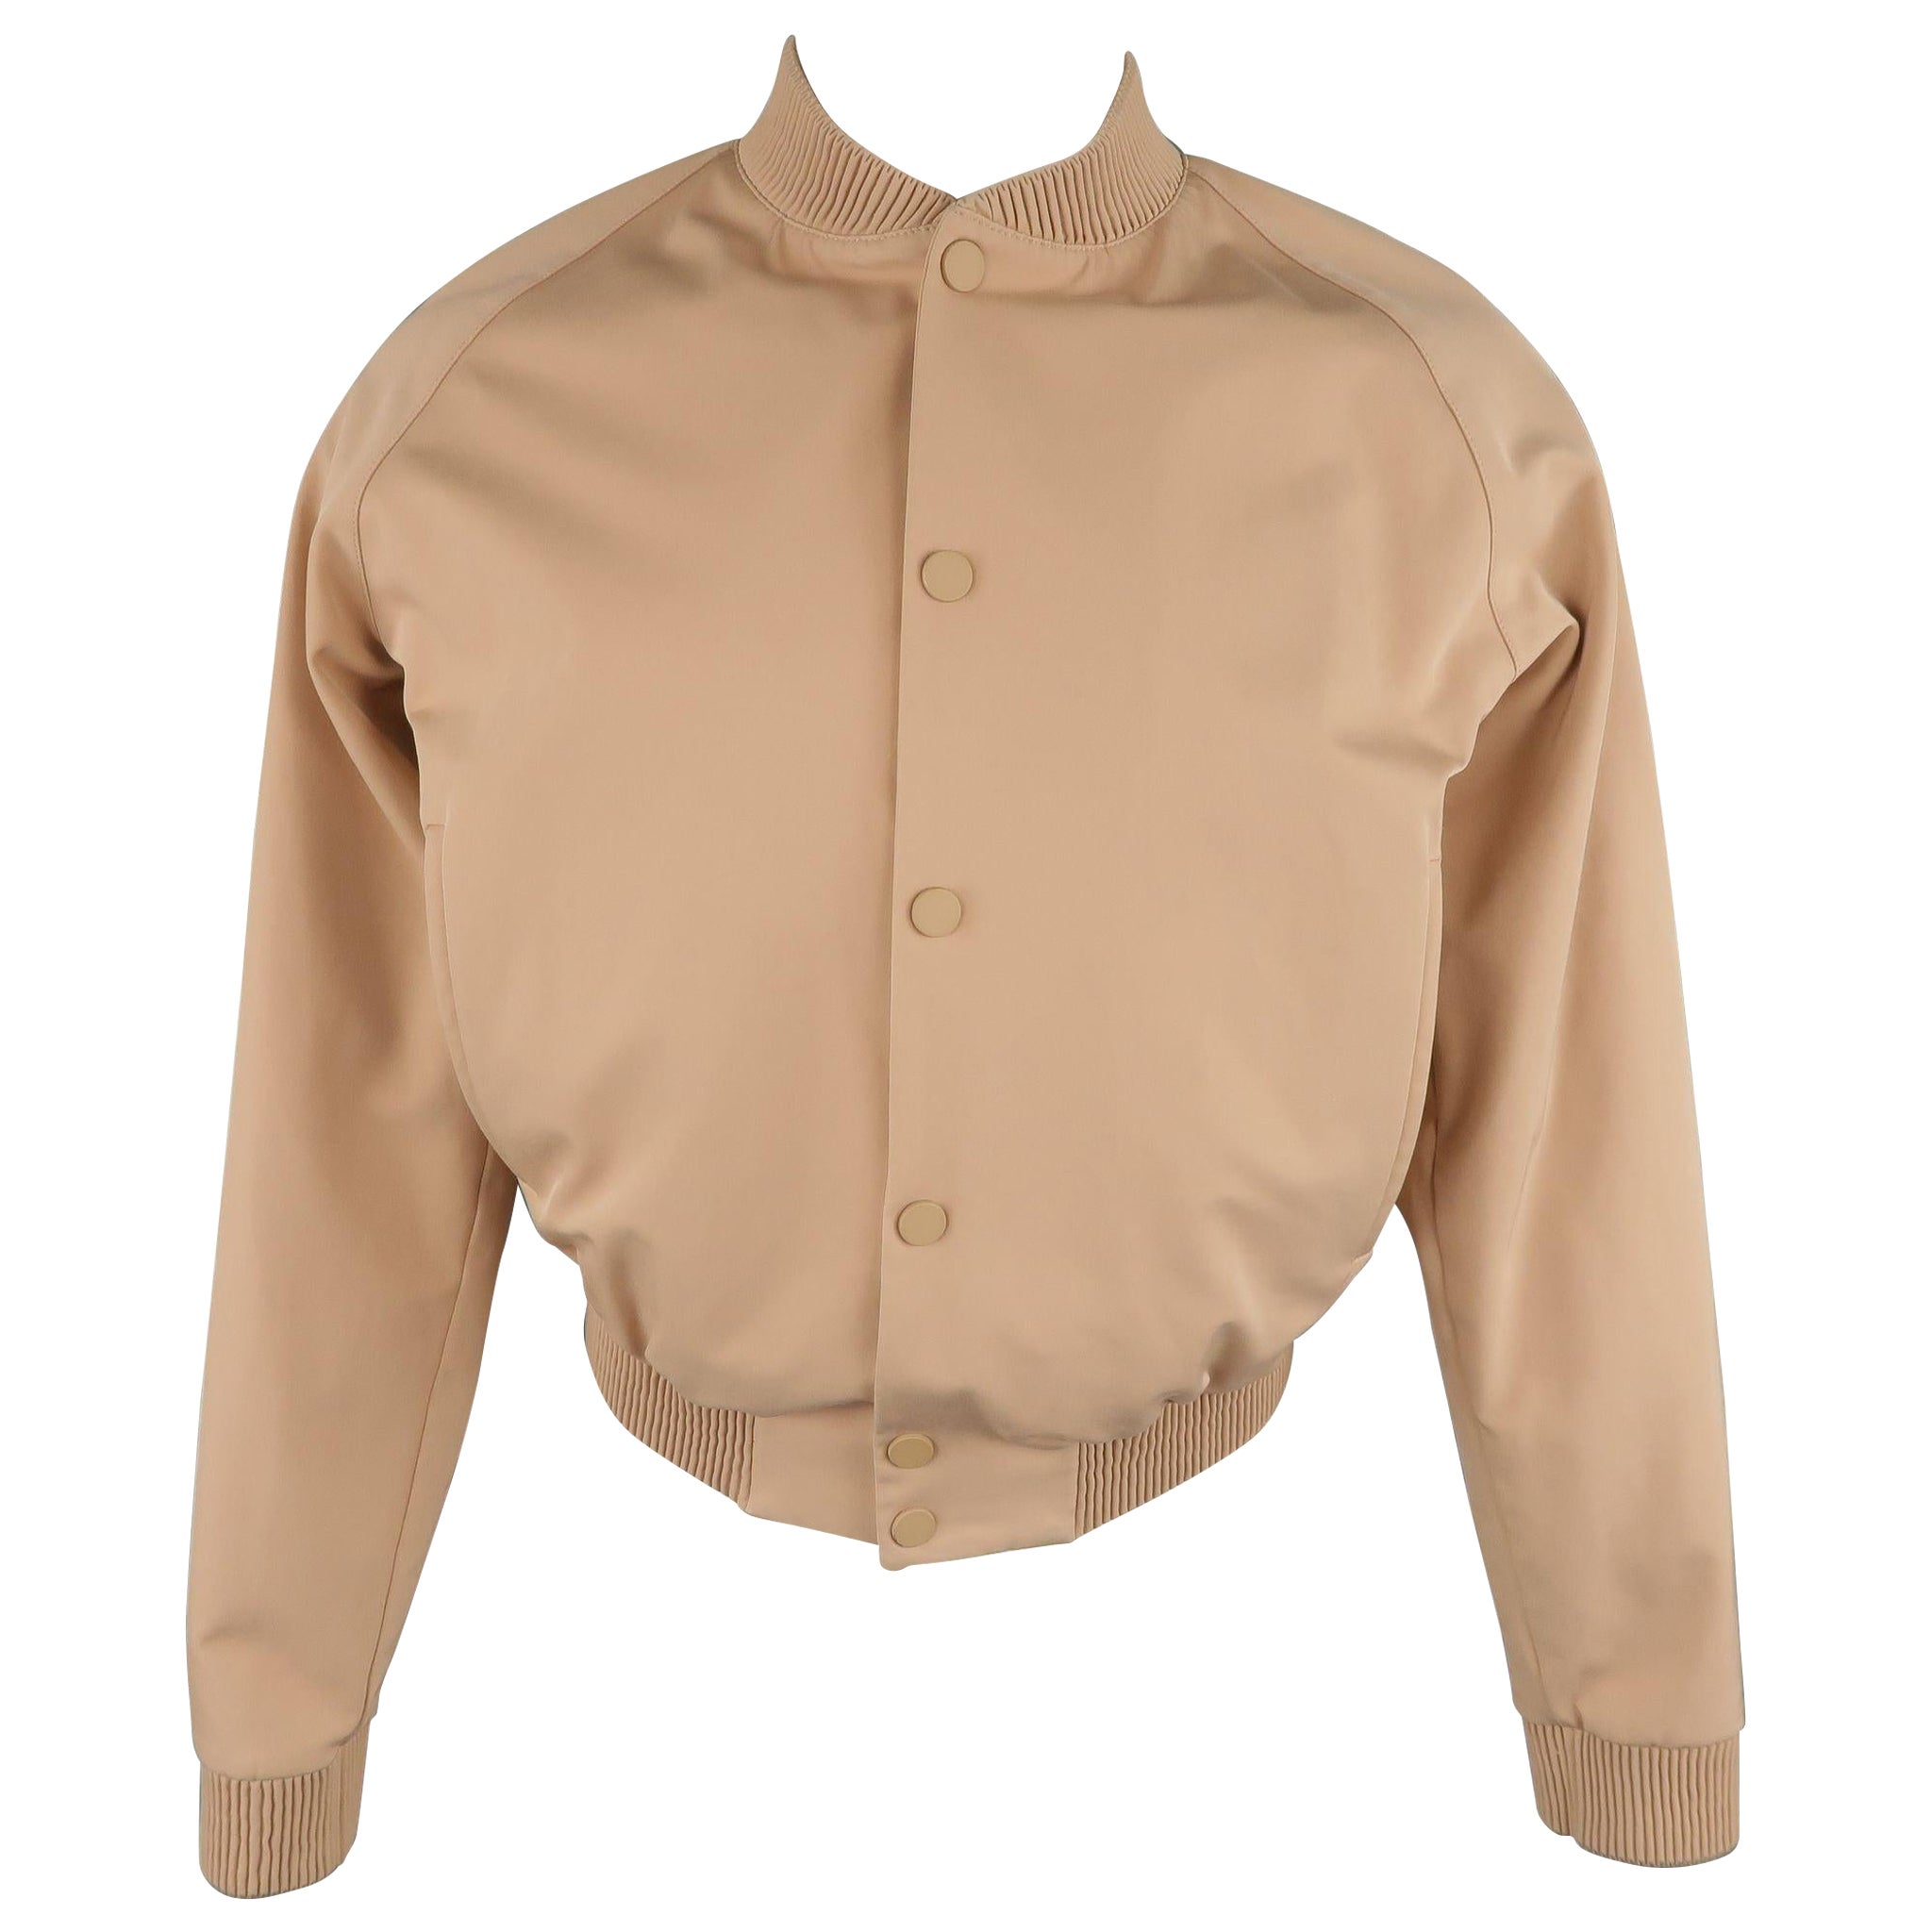 CALVIN KLEIN COLLECTION Spring 2015 Runway 38 Blush Nude Tan Bomber Jacket For Sale